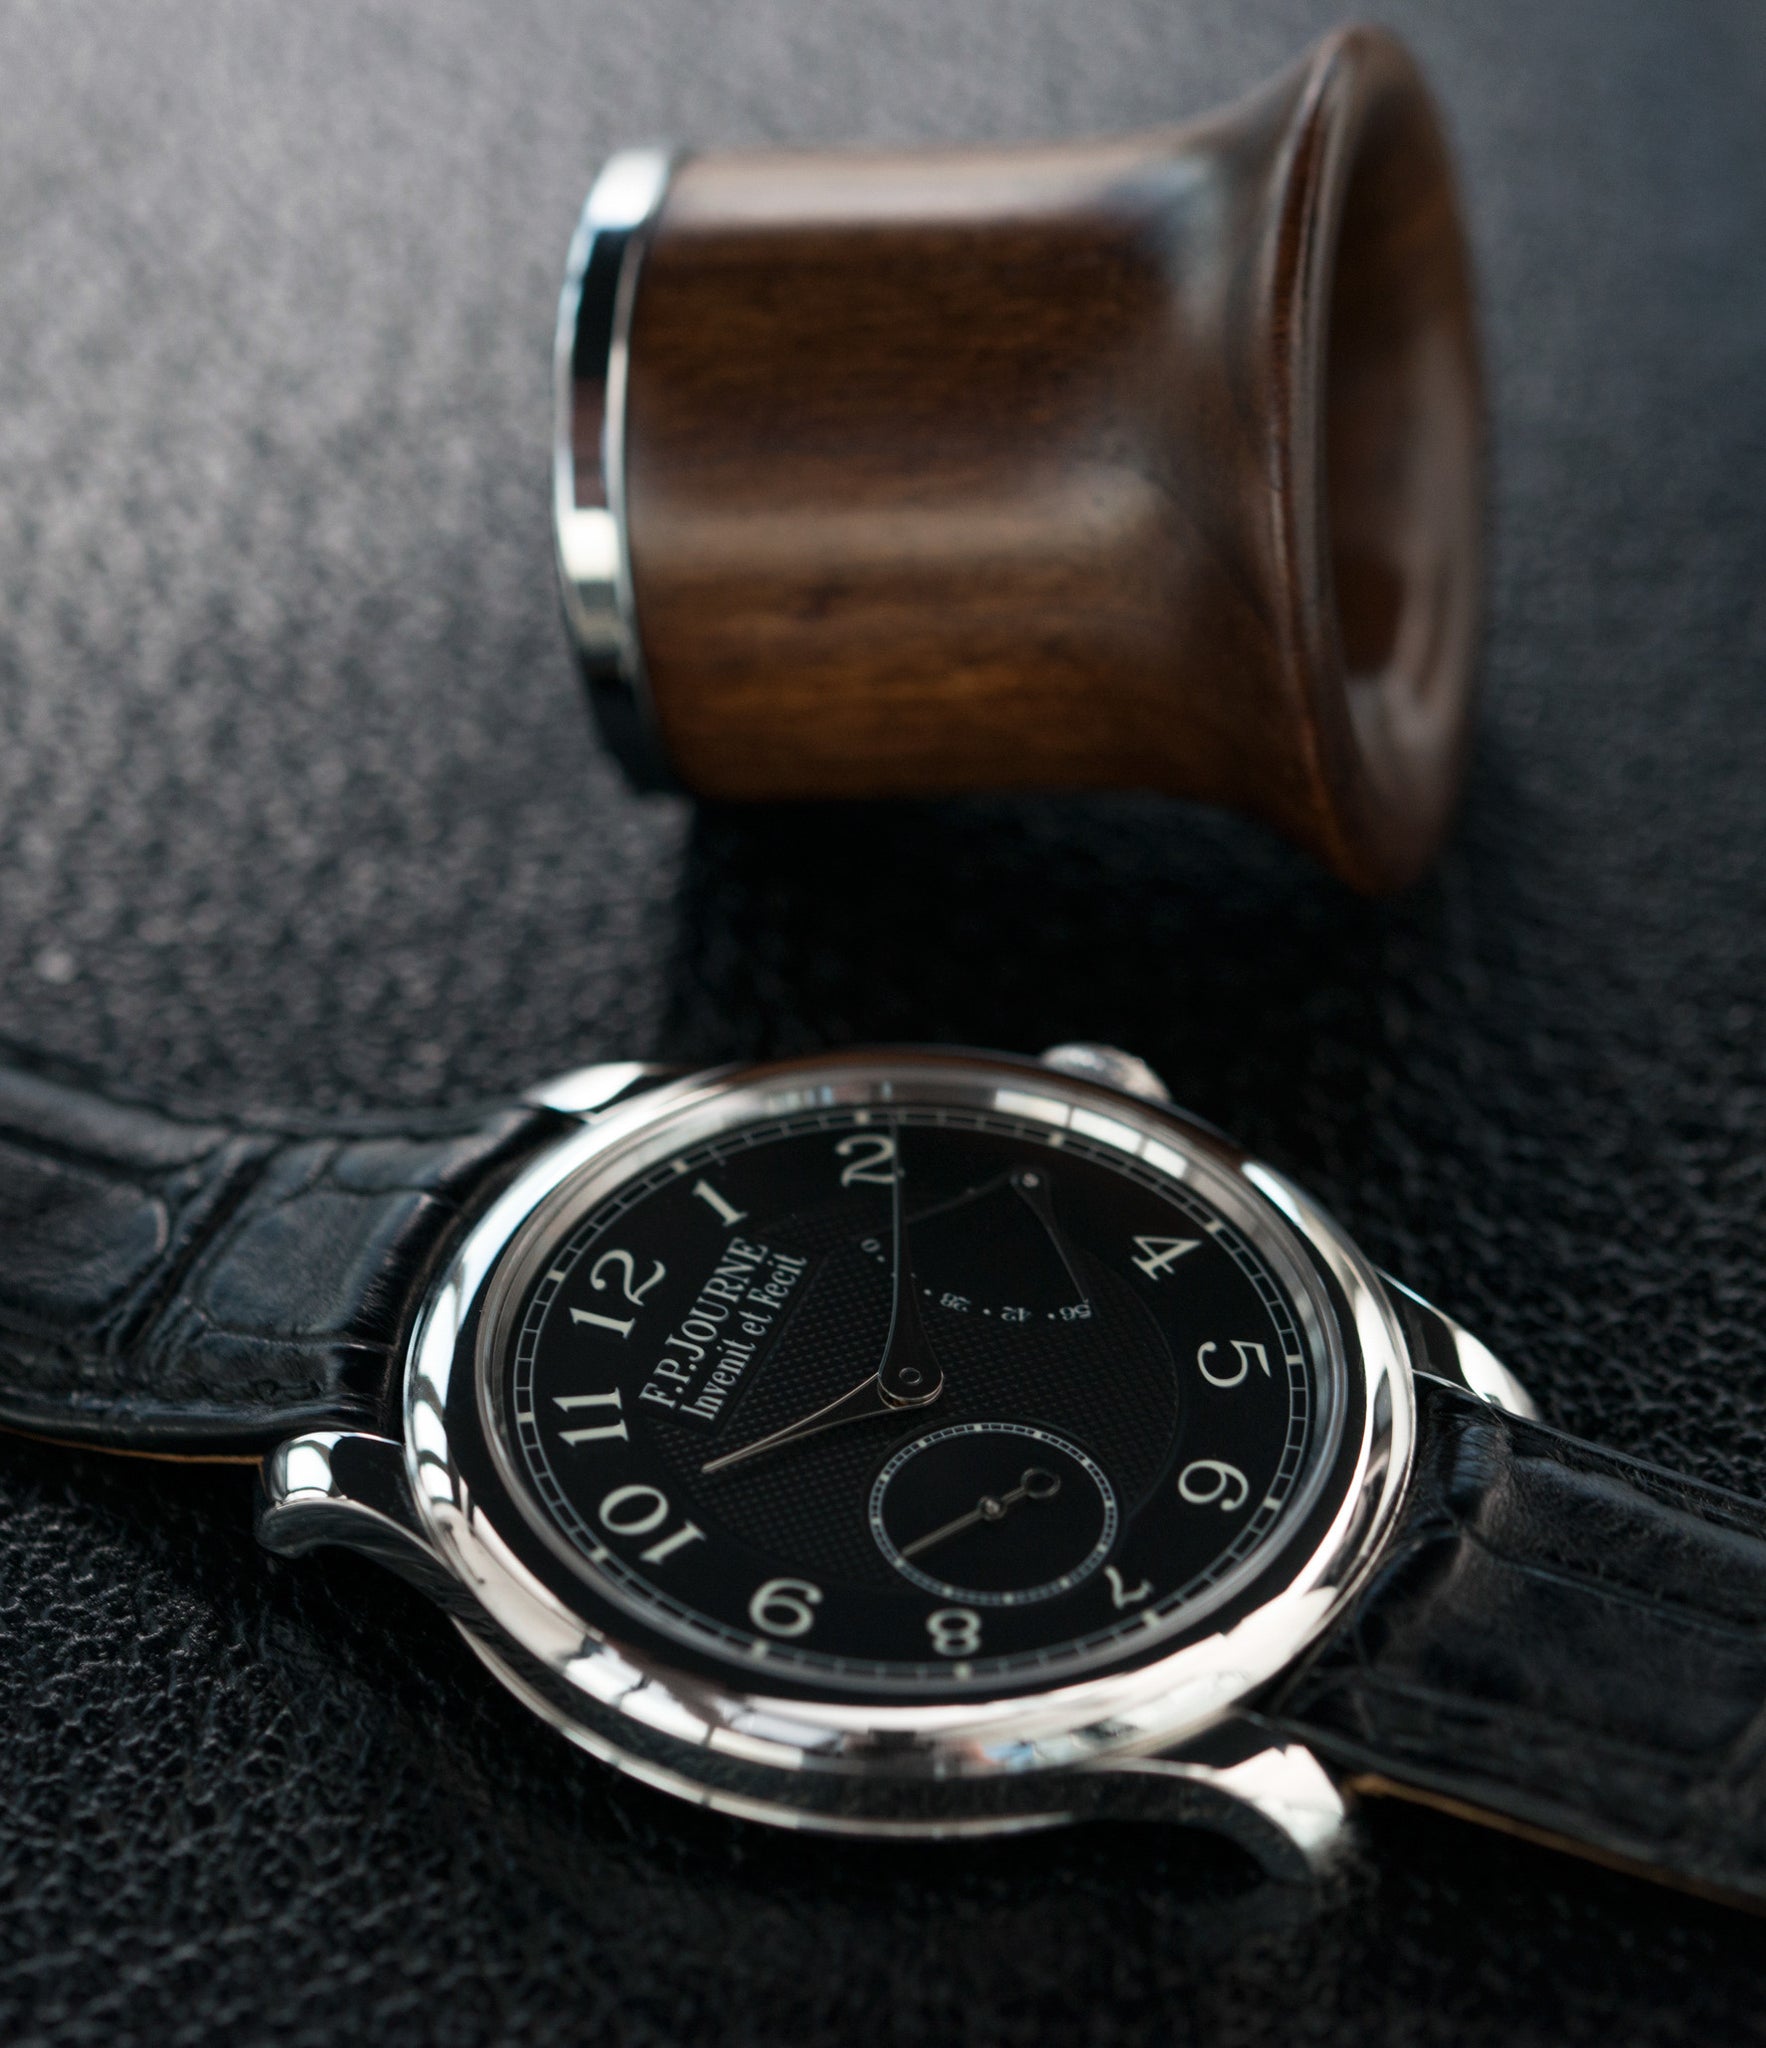 time-only dress watch F. P. Journe Chronometre Souverain Black Label 40 mm platinum for sale online at A Collected Man London online specialist of independent watchmakers